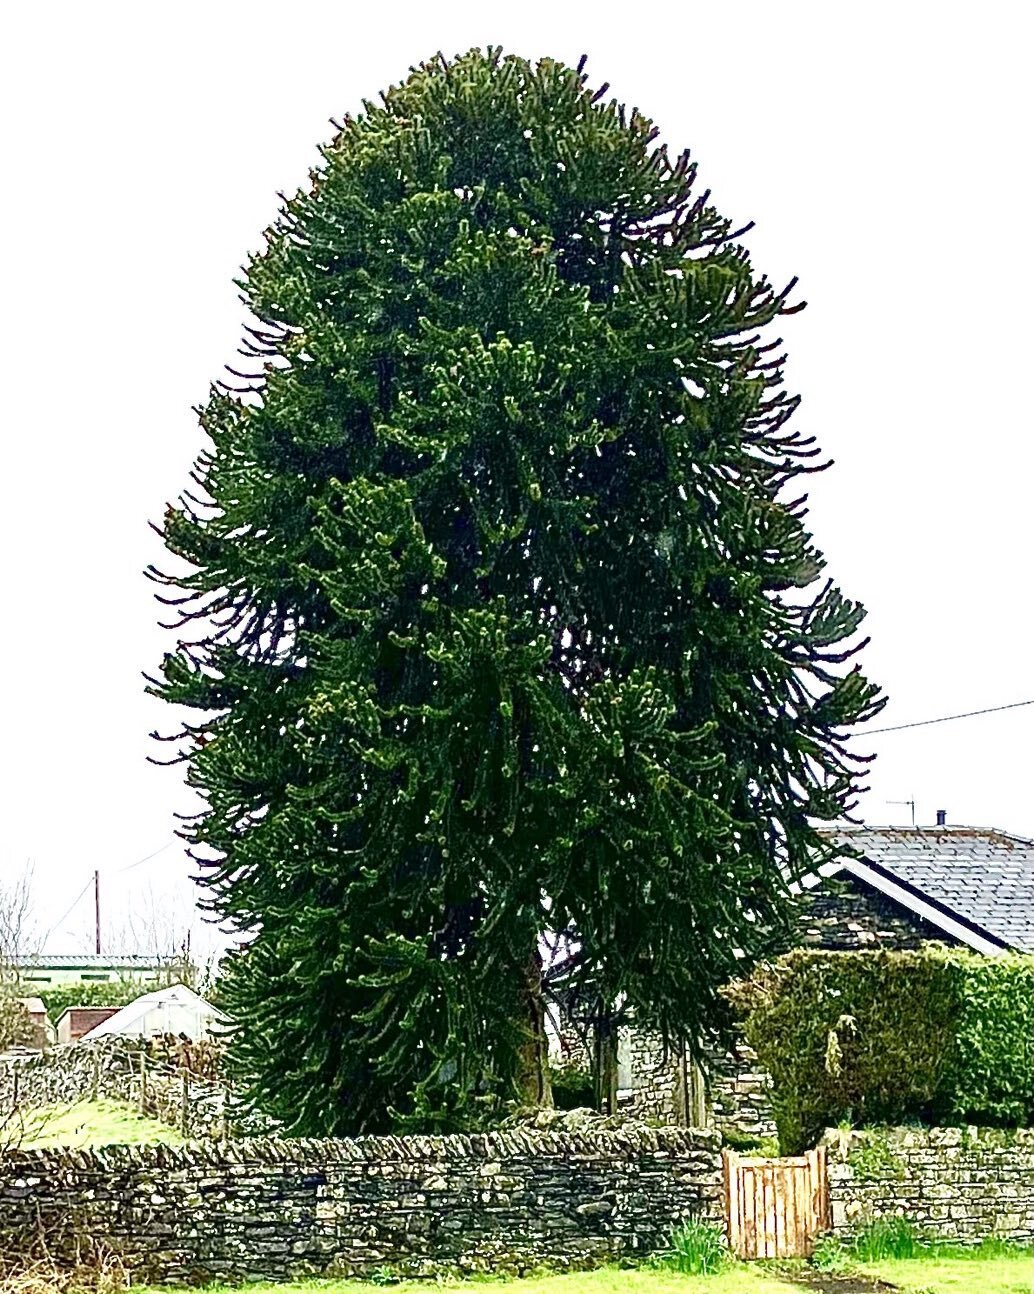 A nice mature Tree of the Day from Staveley in the English Lake District. It&rsquo;s a Monkey Puzzle Tree (Araucaria araucana) - a long way from its natural home in the Andes mountains of Chile and Peru. It&rsquo;s doing pretty well - many lose their